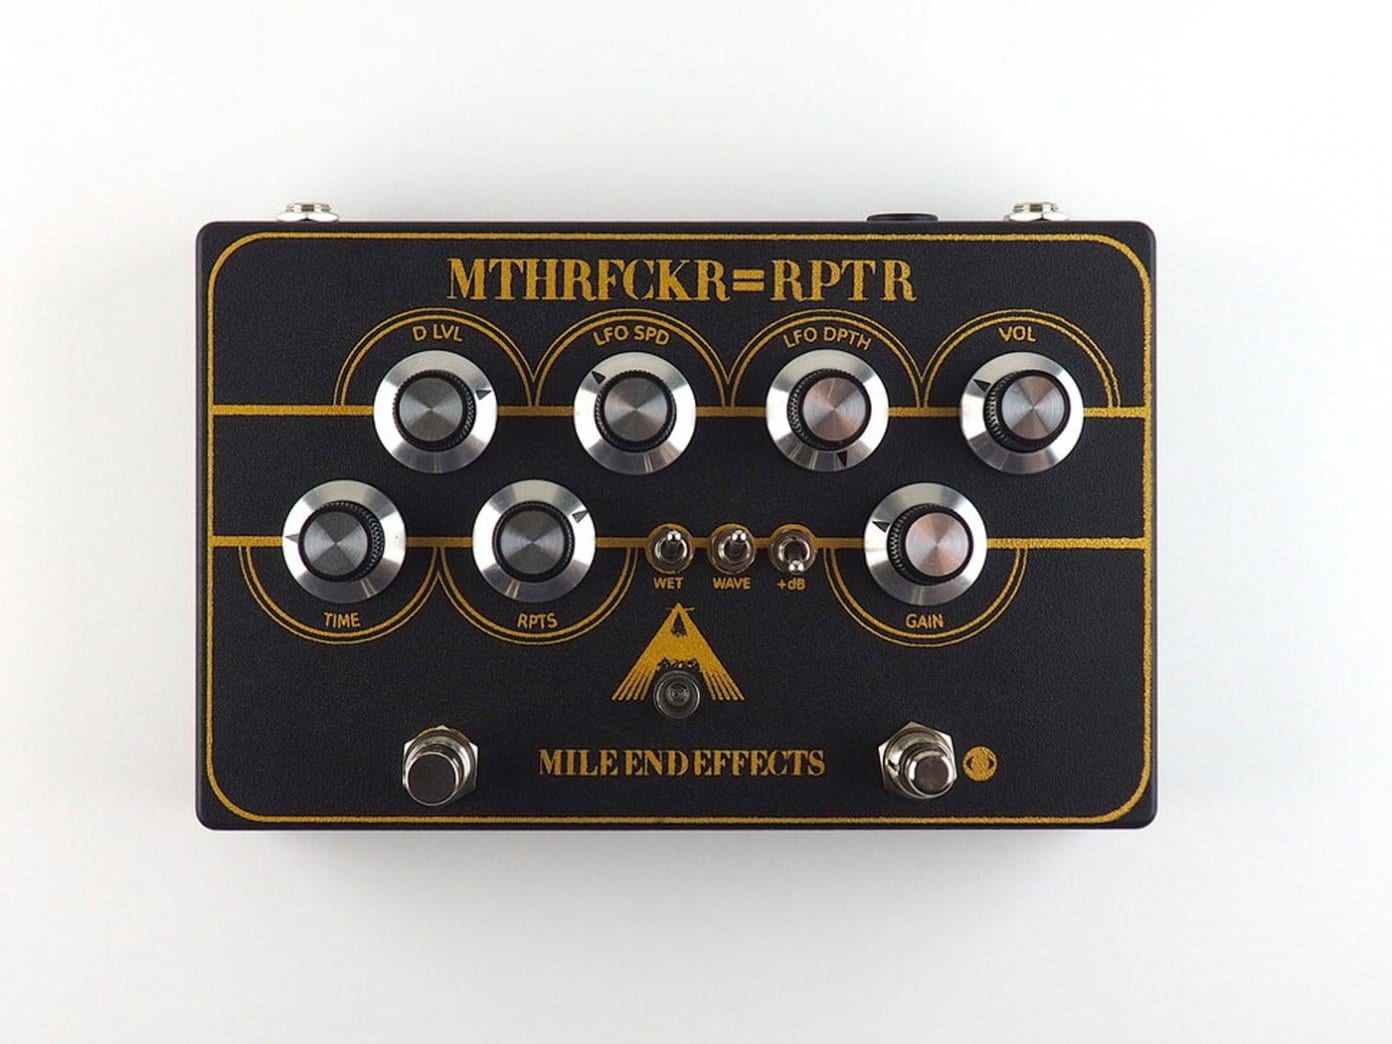 Mile End Effects’ new mthrfckr=rptr pedal